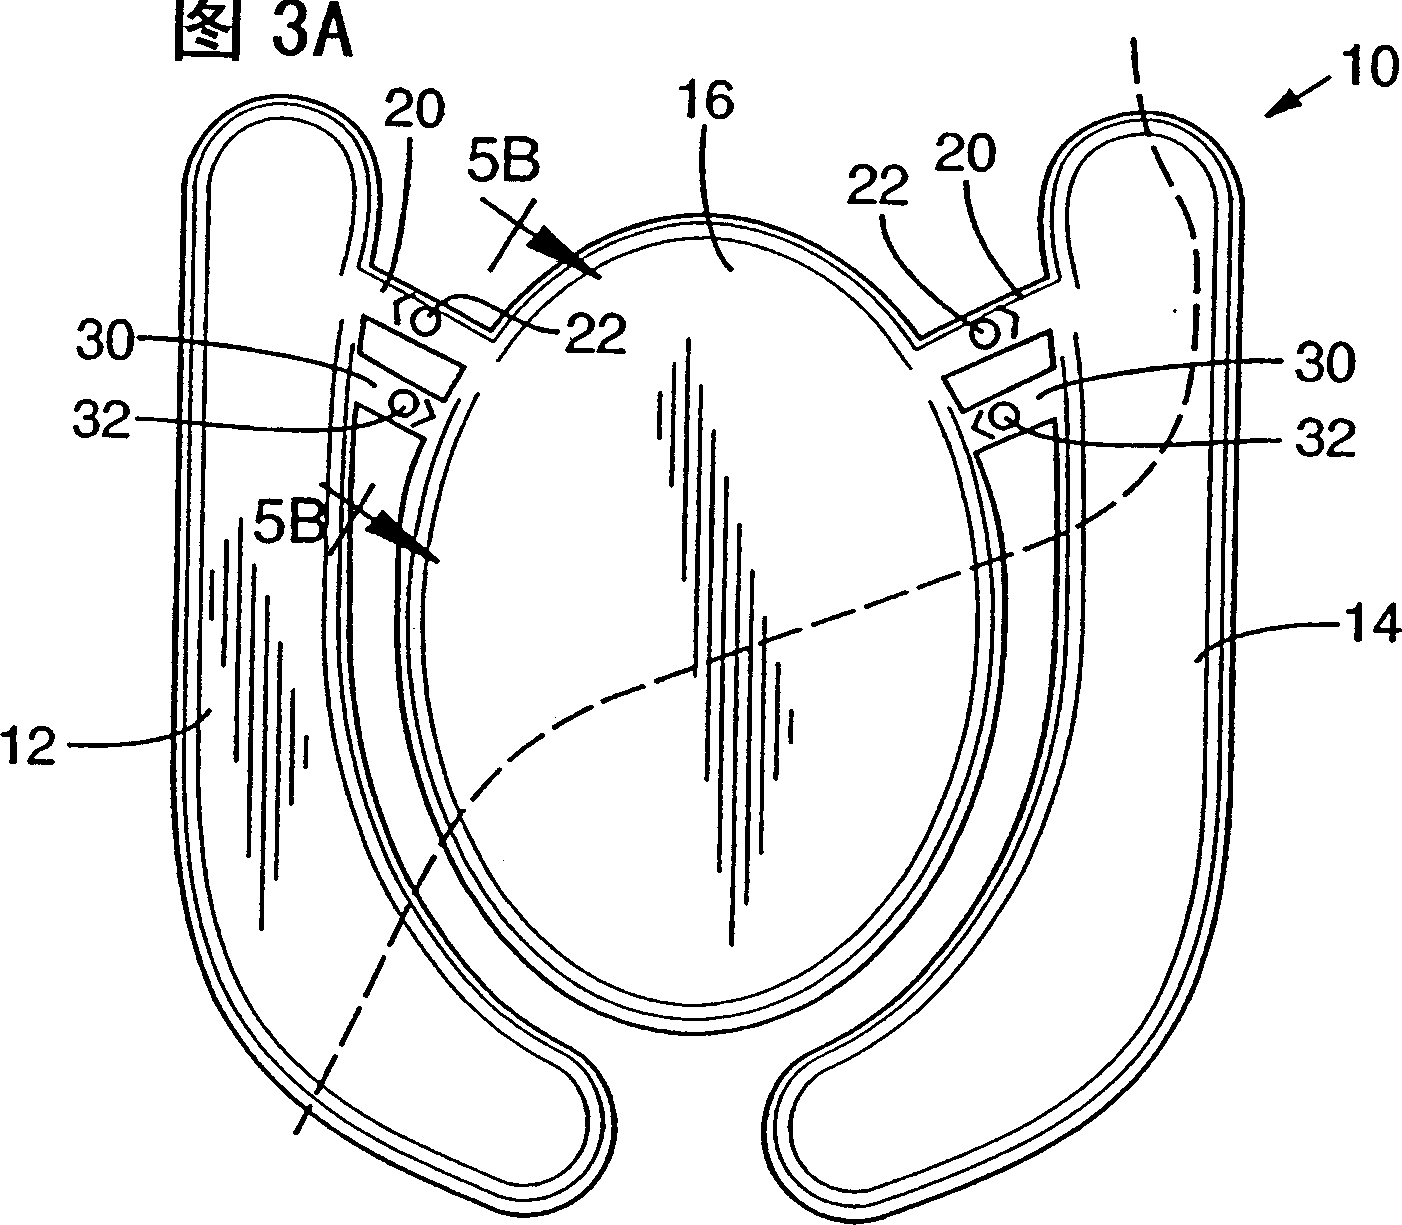 Article of footwear with motion control device